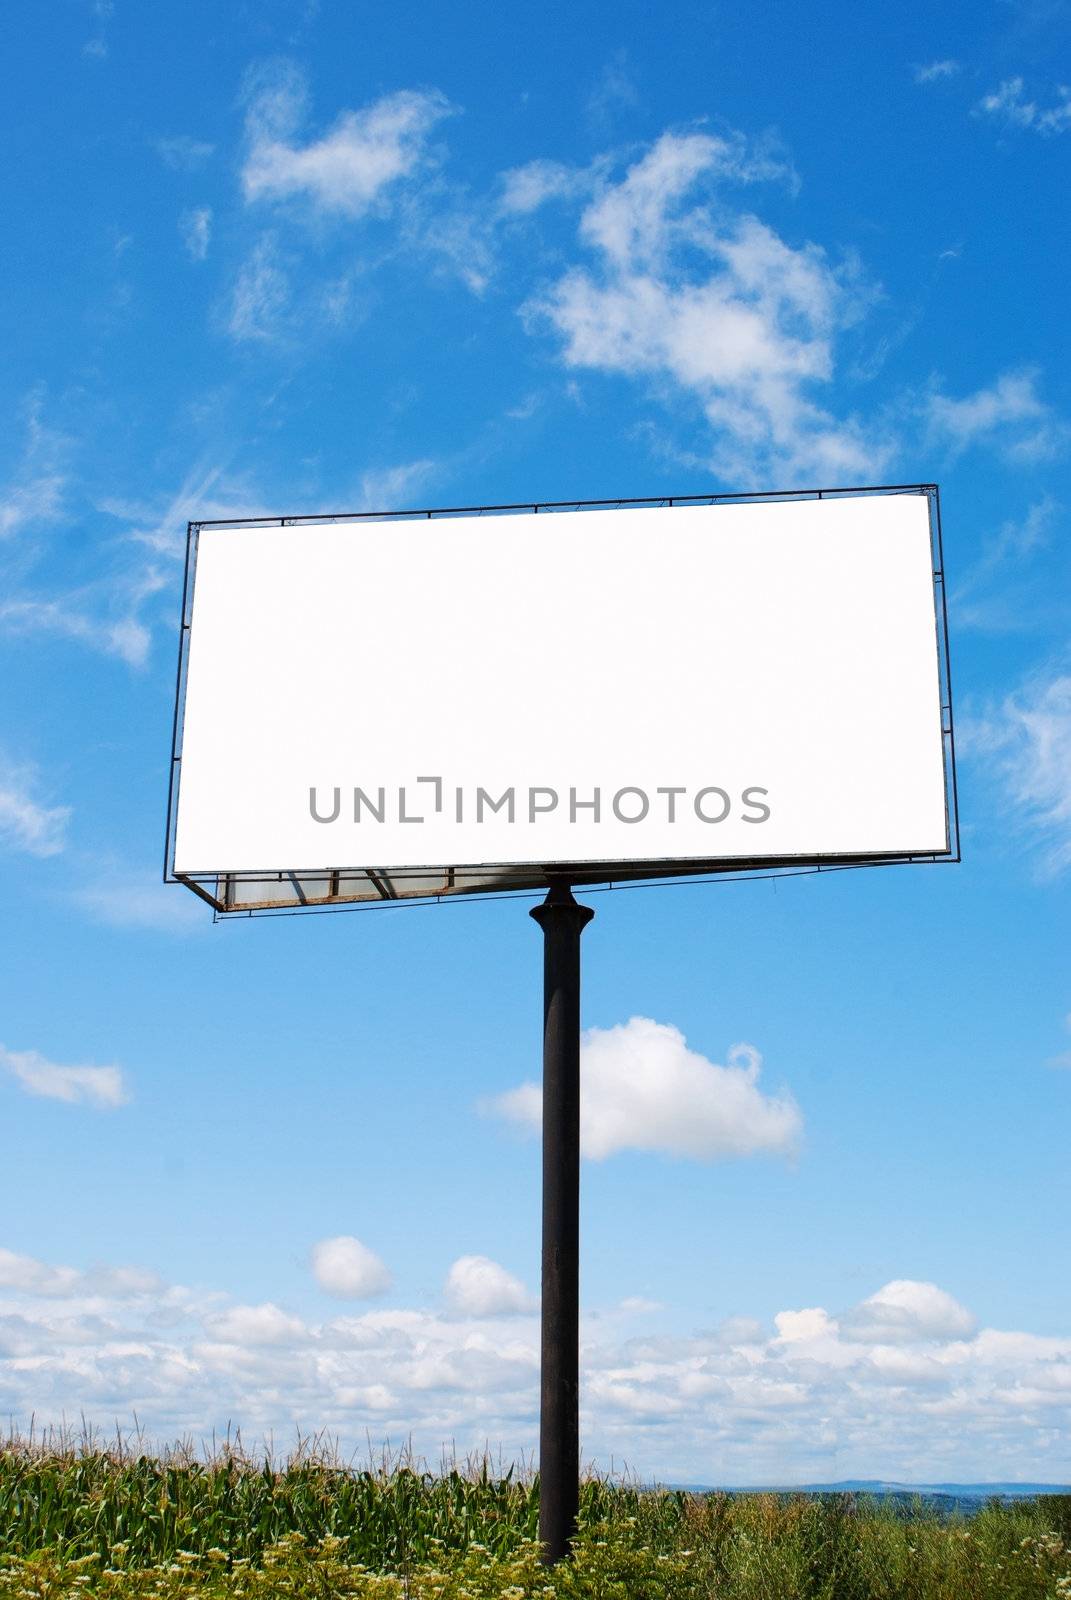 Billboard with a copy space at a field